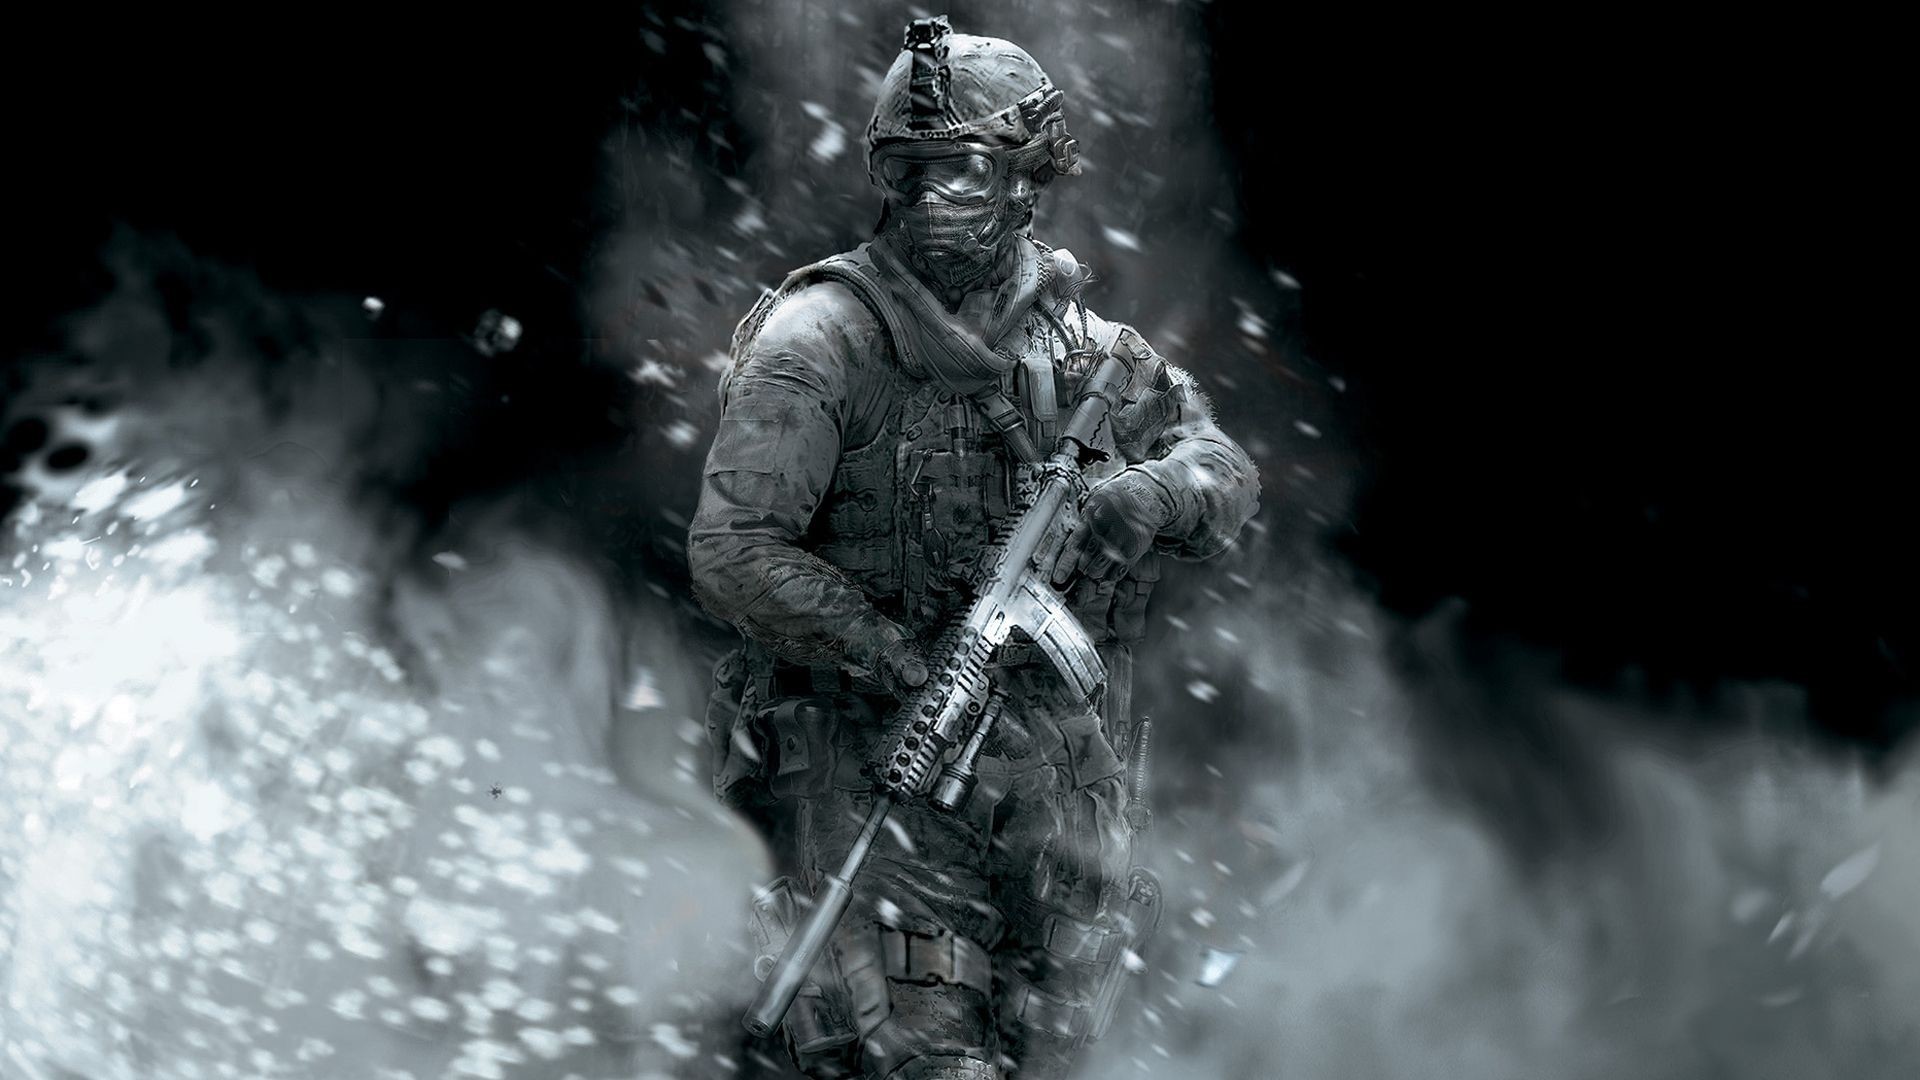 1920x1080 MW2 Ghost Wallpapers - Wallpaper Cave Call Of Duty Modern Warfare 2  Wallpaper Ghost HD Wallpapers .